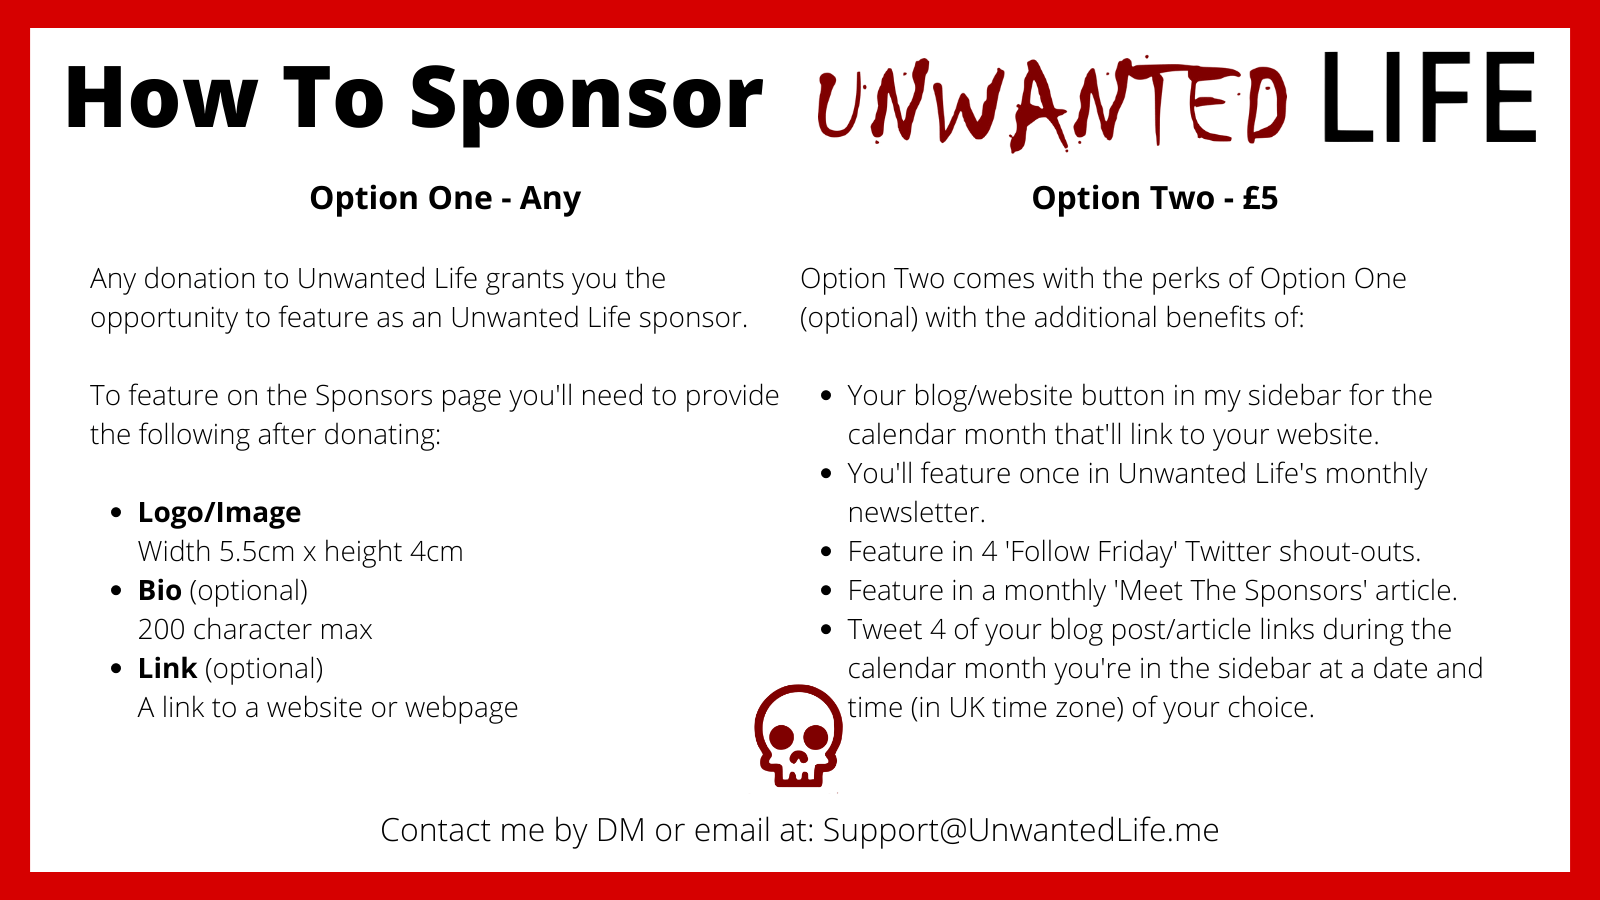 This image outlines how to sponsor Unwanted Life and the perks you get in return, which can also be found in the content on this page